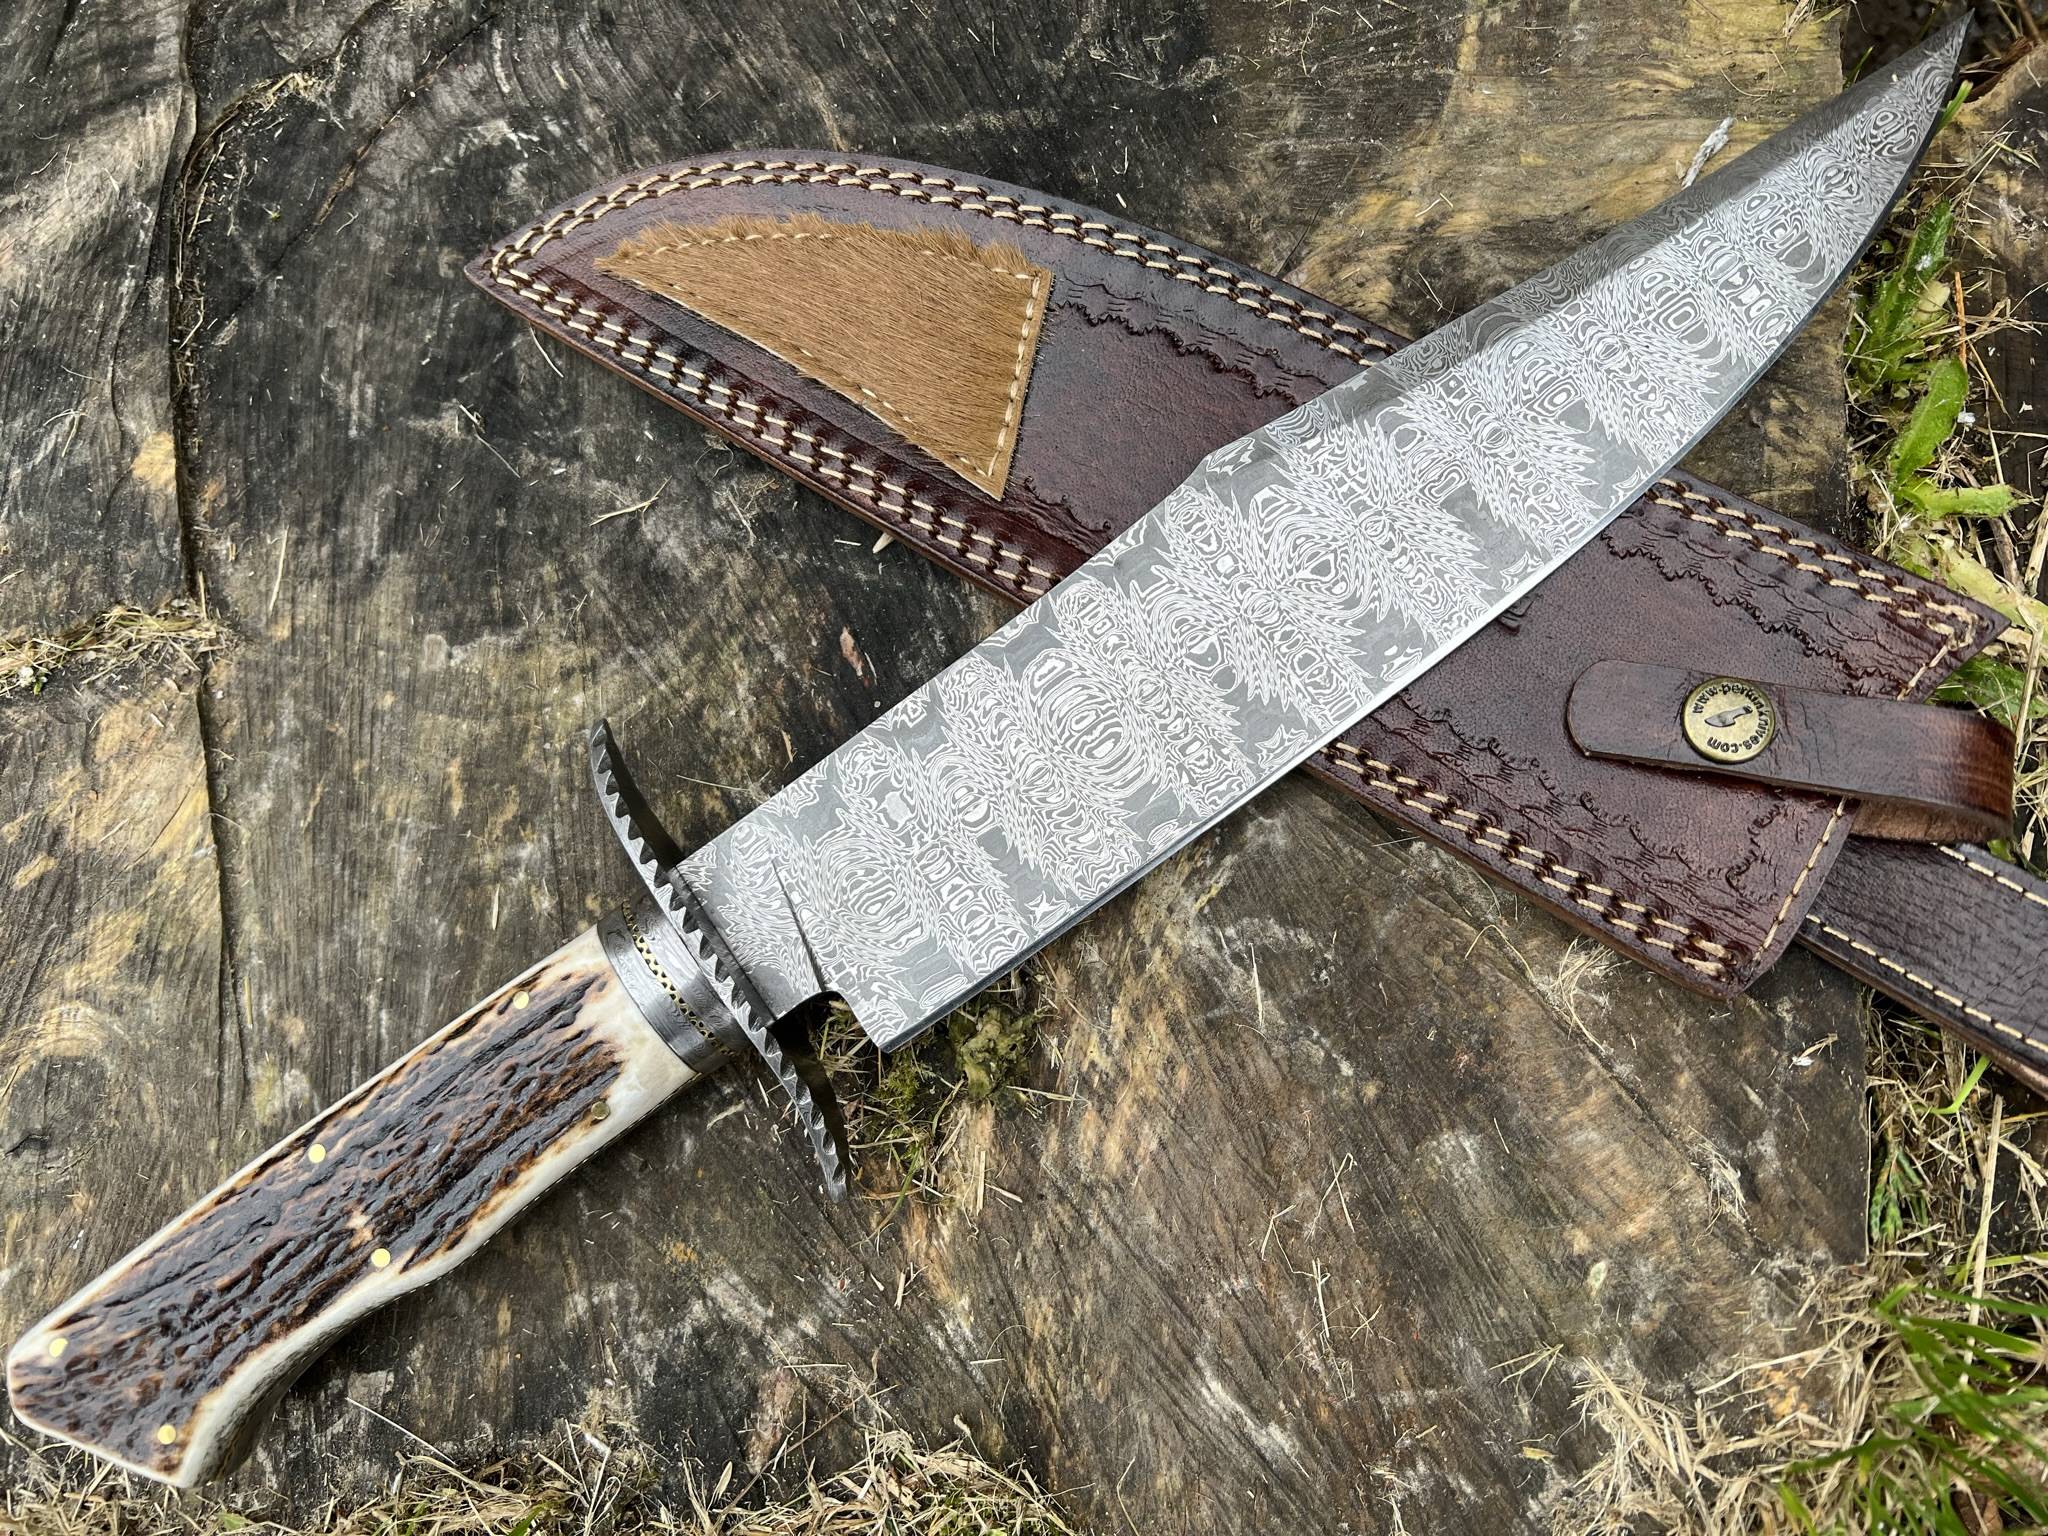 Fixed Blade Hunting Knife Bowie Knife Handmade Stag Antler Handle Unique Pattern One Kind of Handcrafted Hunting Knife